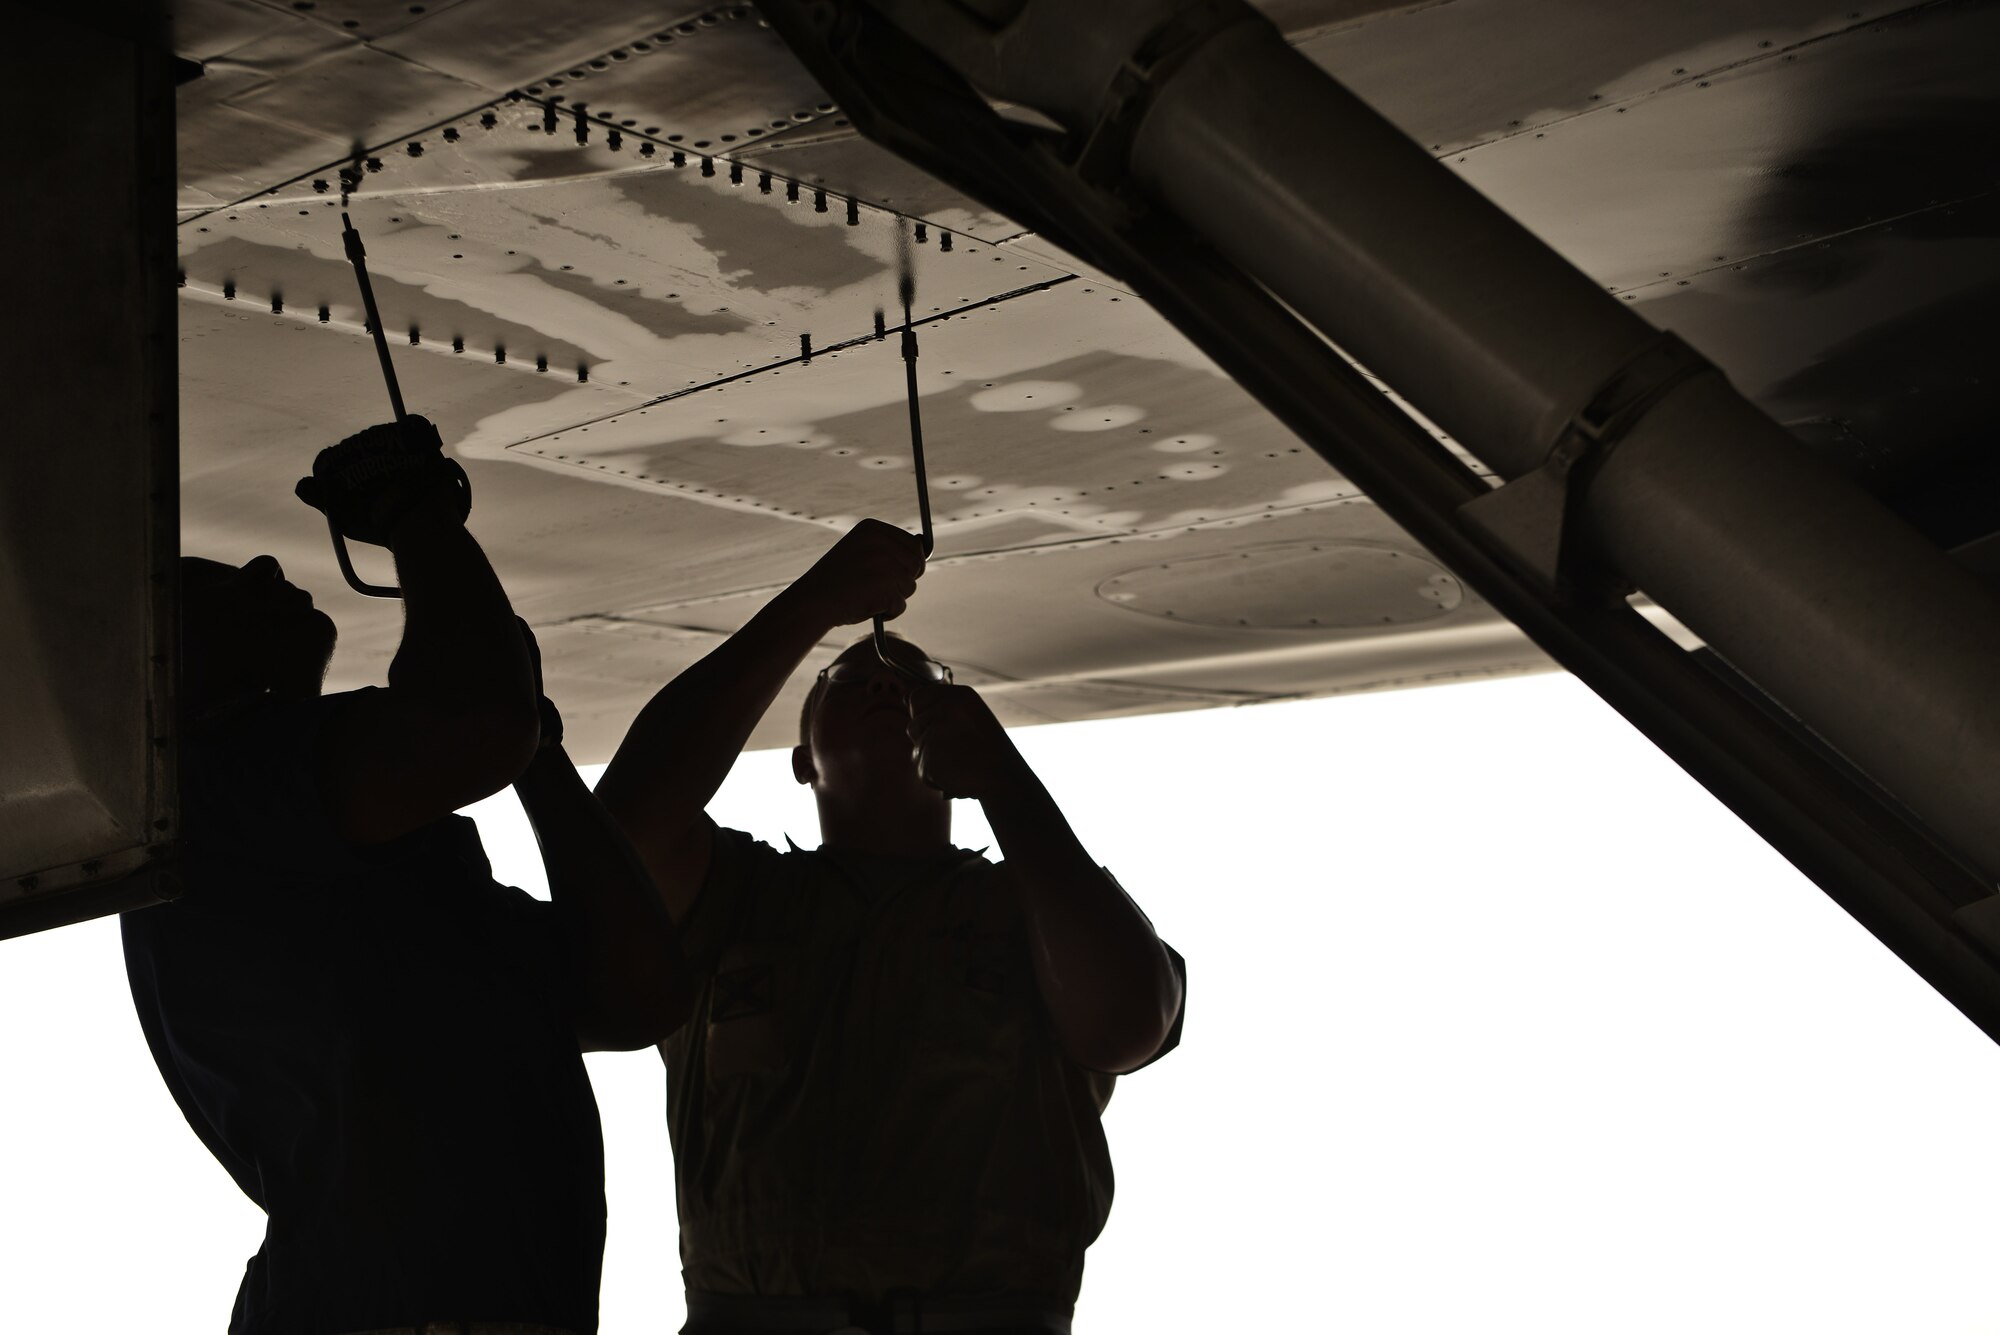 Tech. Sgt. Nasir and Airman 1st Class James, 28th Aircraft Maintenance Squadron crew chiefs, remove a panel underneath a B-1 bomber to check for leaks as part of a final pre-flight inspection Sept. 22, 2015 at Al Udeid Air Base, Qatar. Nasir and James were deployed from Ellsworth Air Force Base, S.D. (U.S. Air Force photo by Staff Sgt. Alexandre Montes/Released)